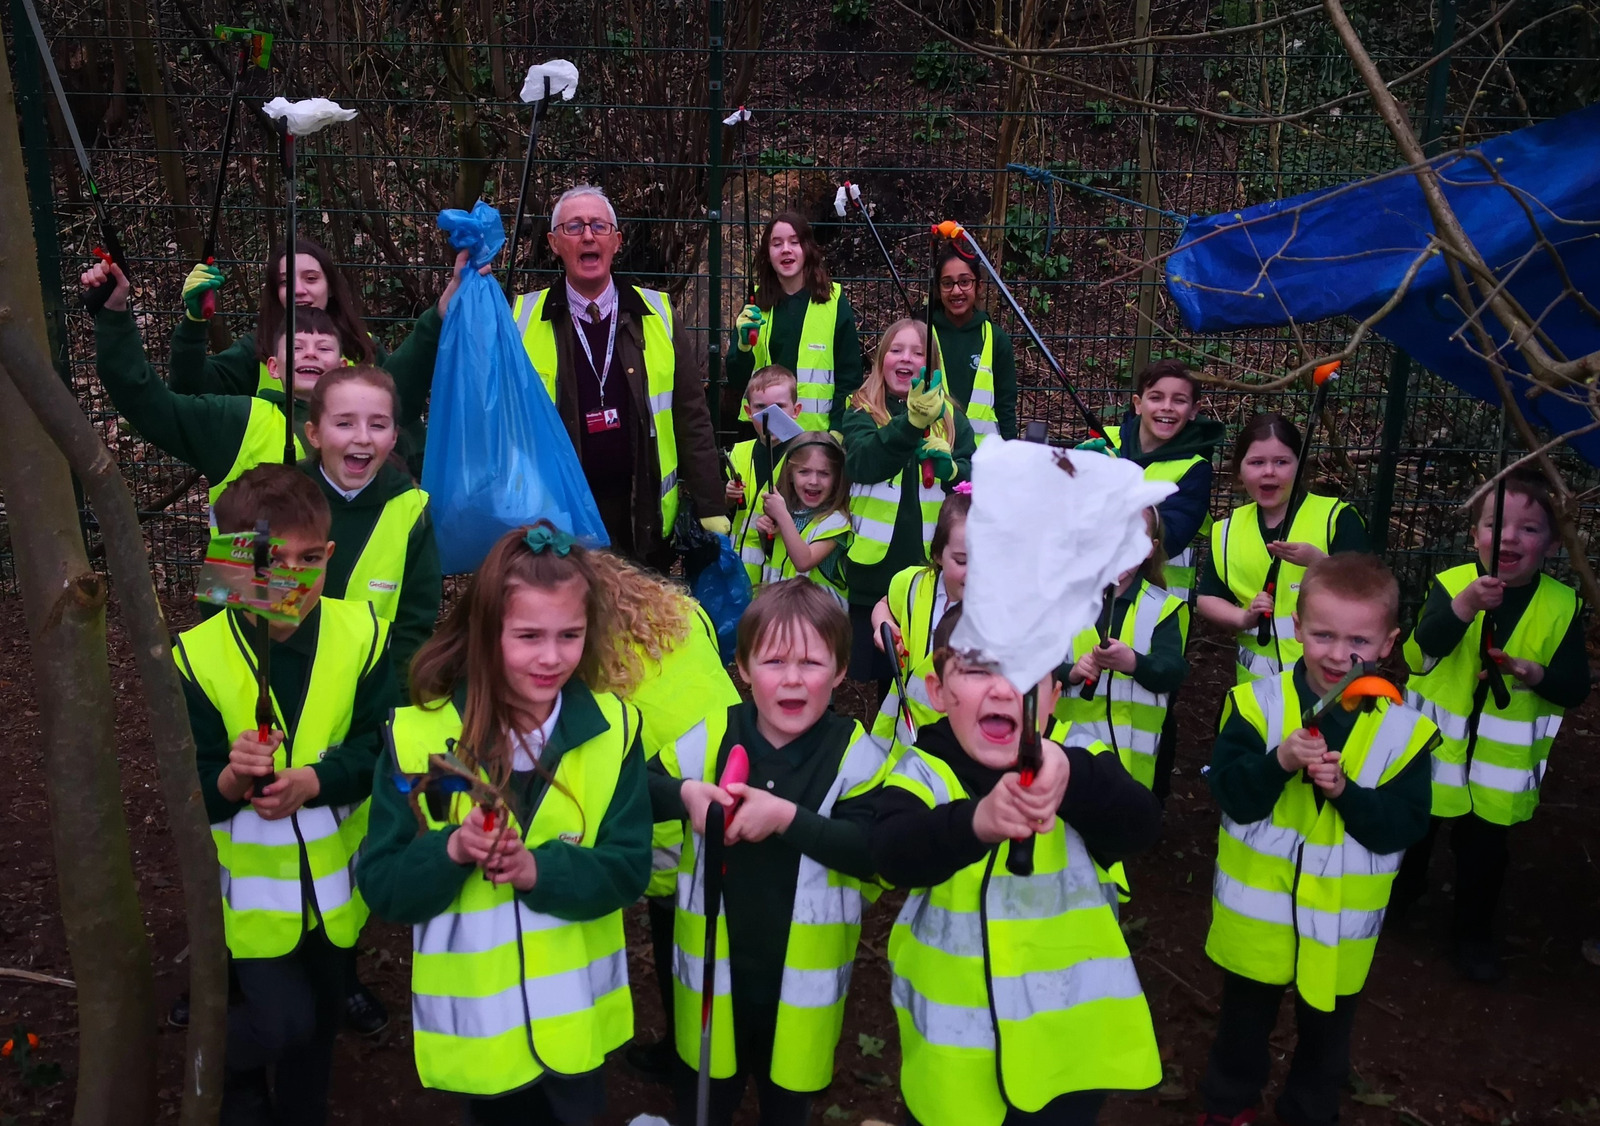 Group photo of school children wearing bright yellow high vis jackets holding litter pickers with rubbish up in the air.